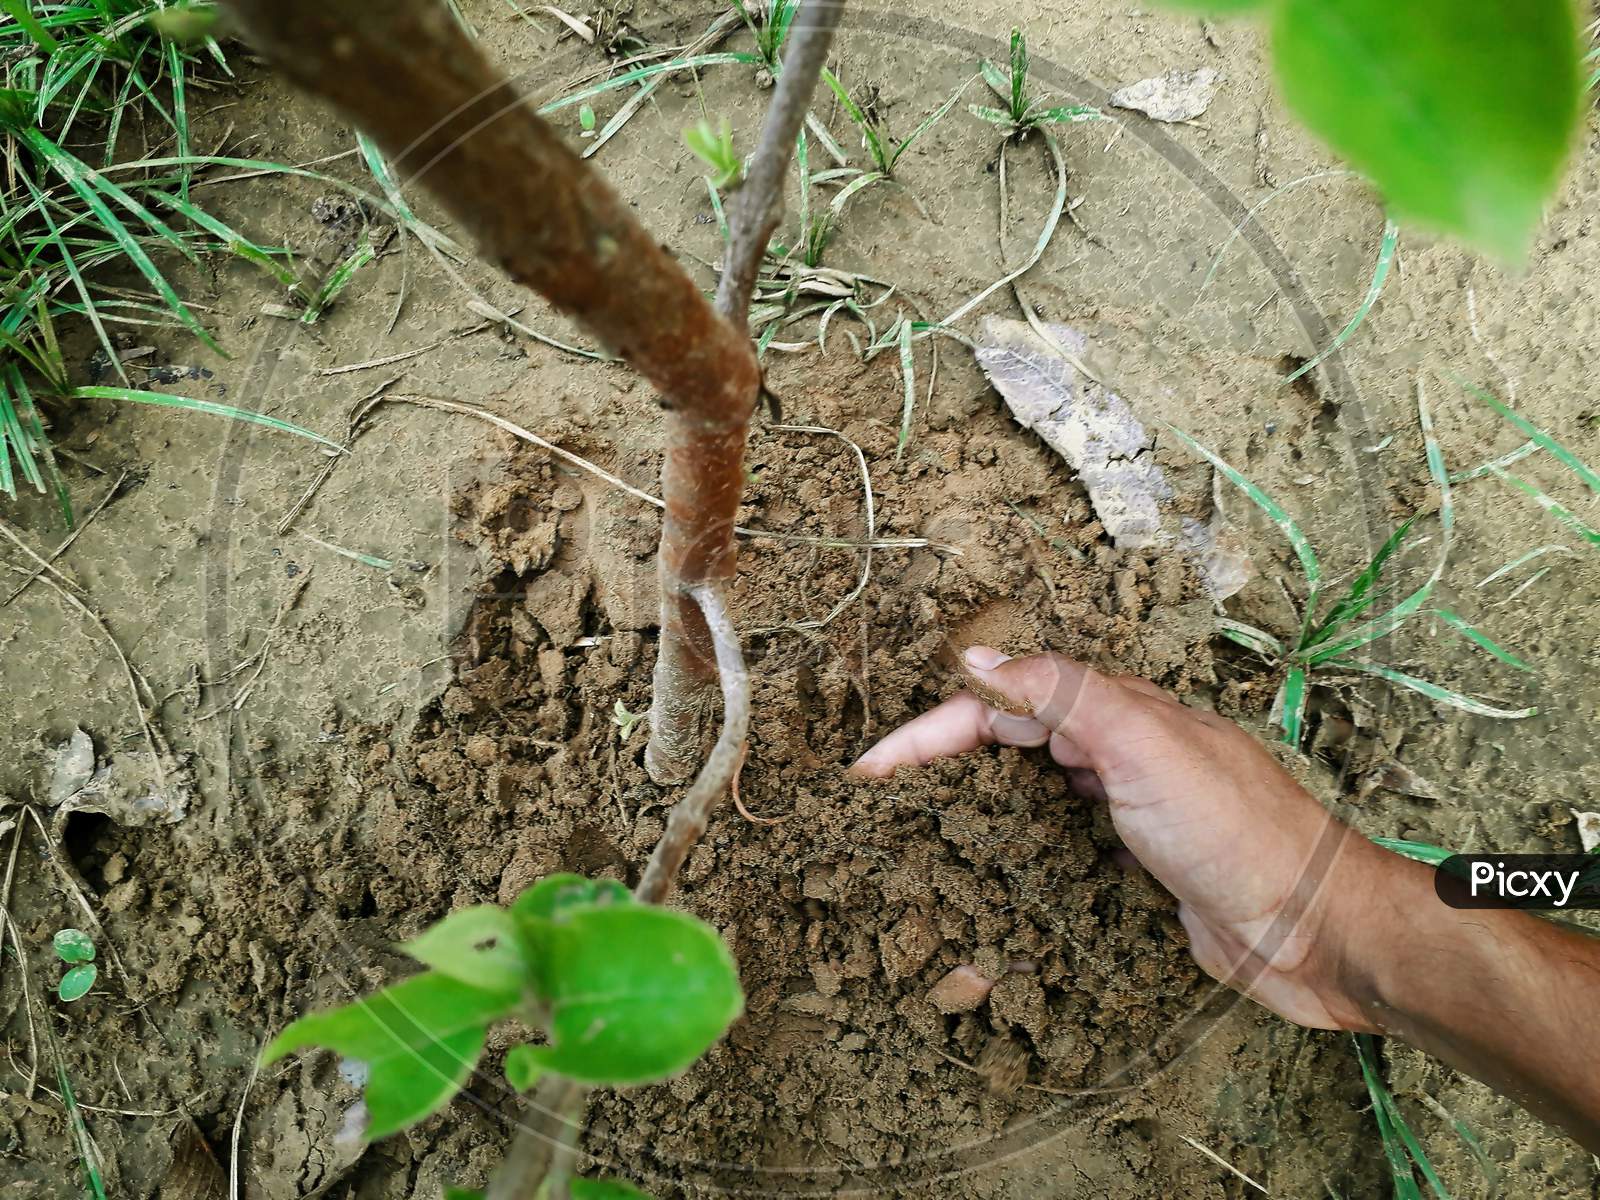 Man Digging Soil With Hand In Home Garden Or Lawn